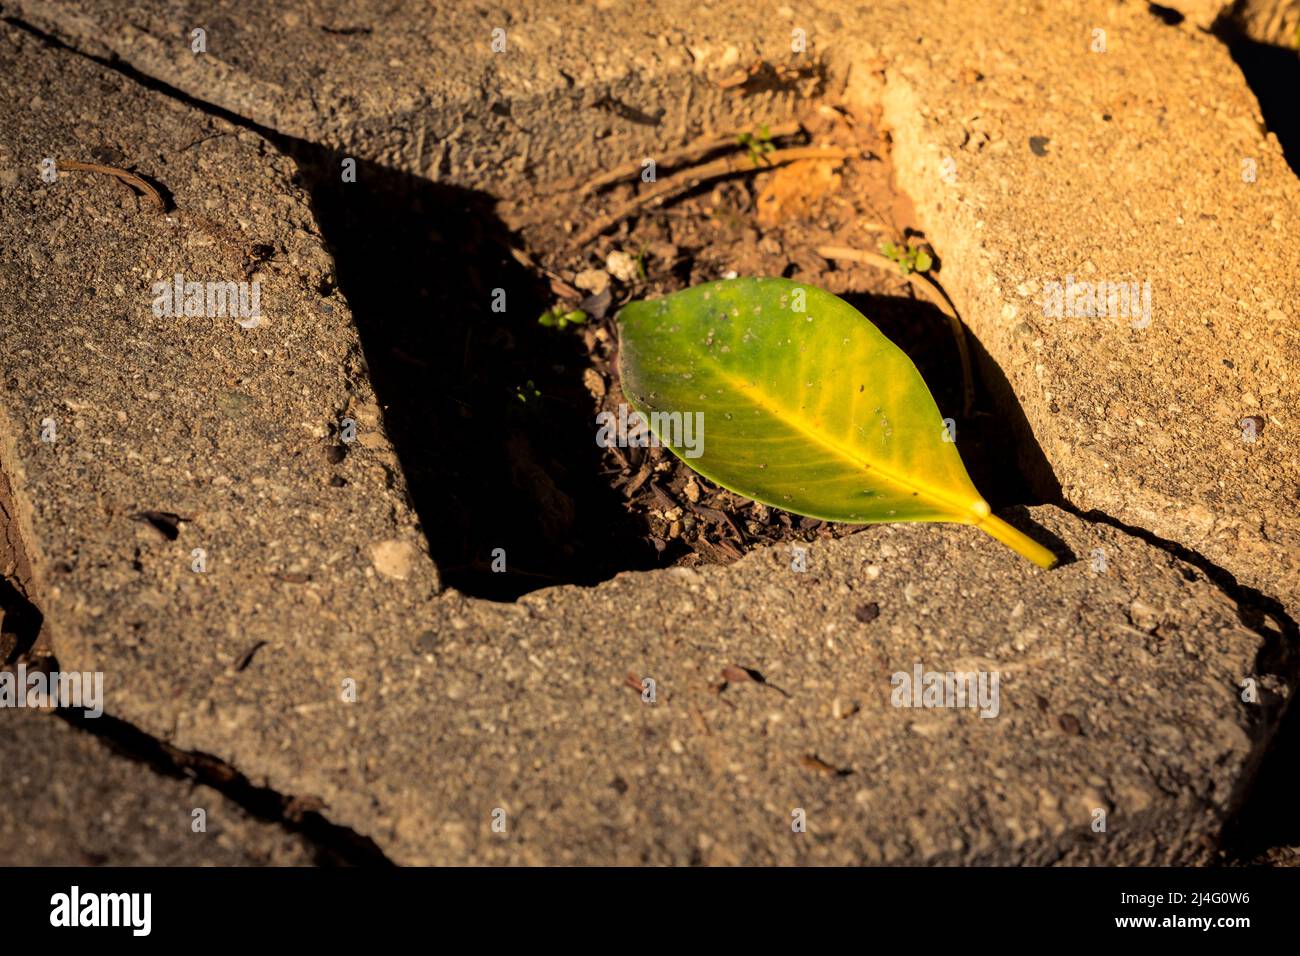 Selective focus of ficus nitida tree leaf known as Indian laurel on diamond shaped cobblestone. Stock Photo